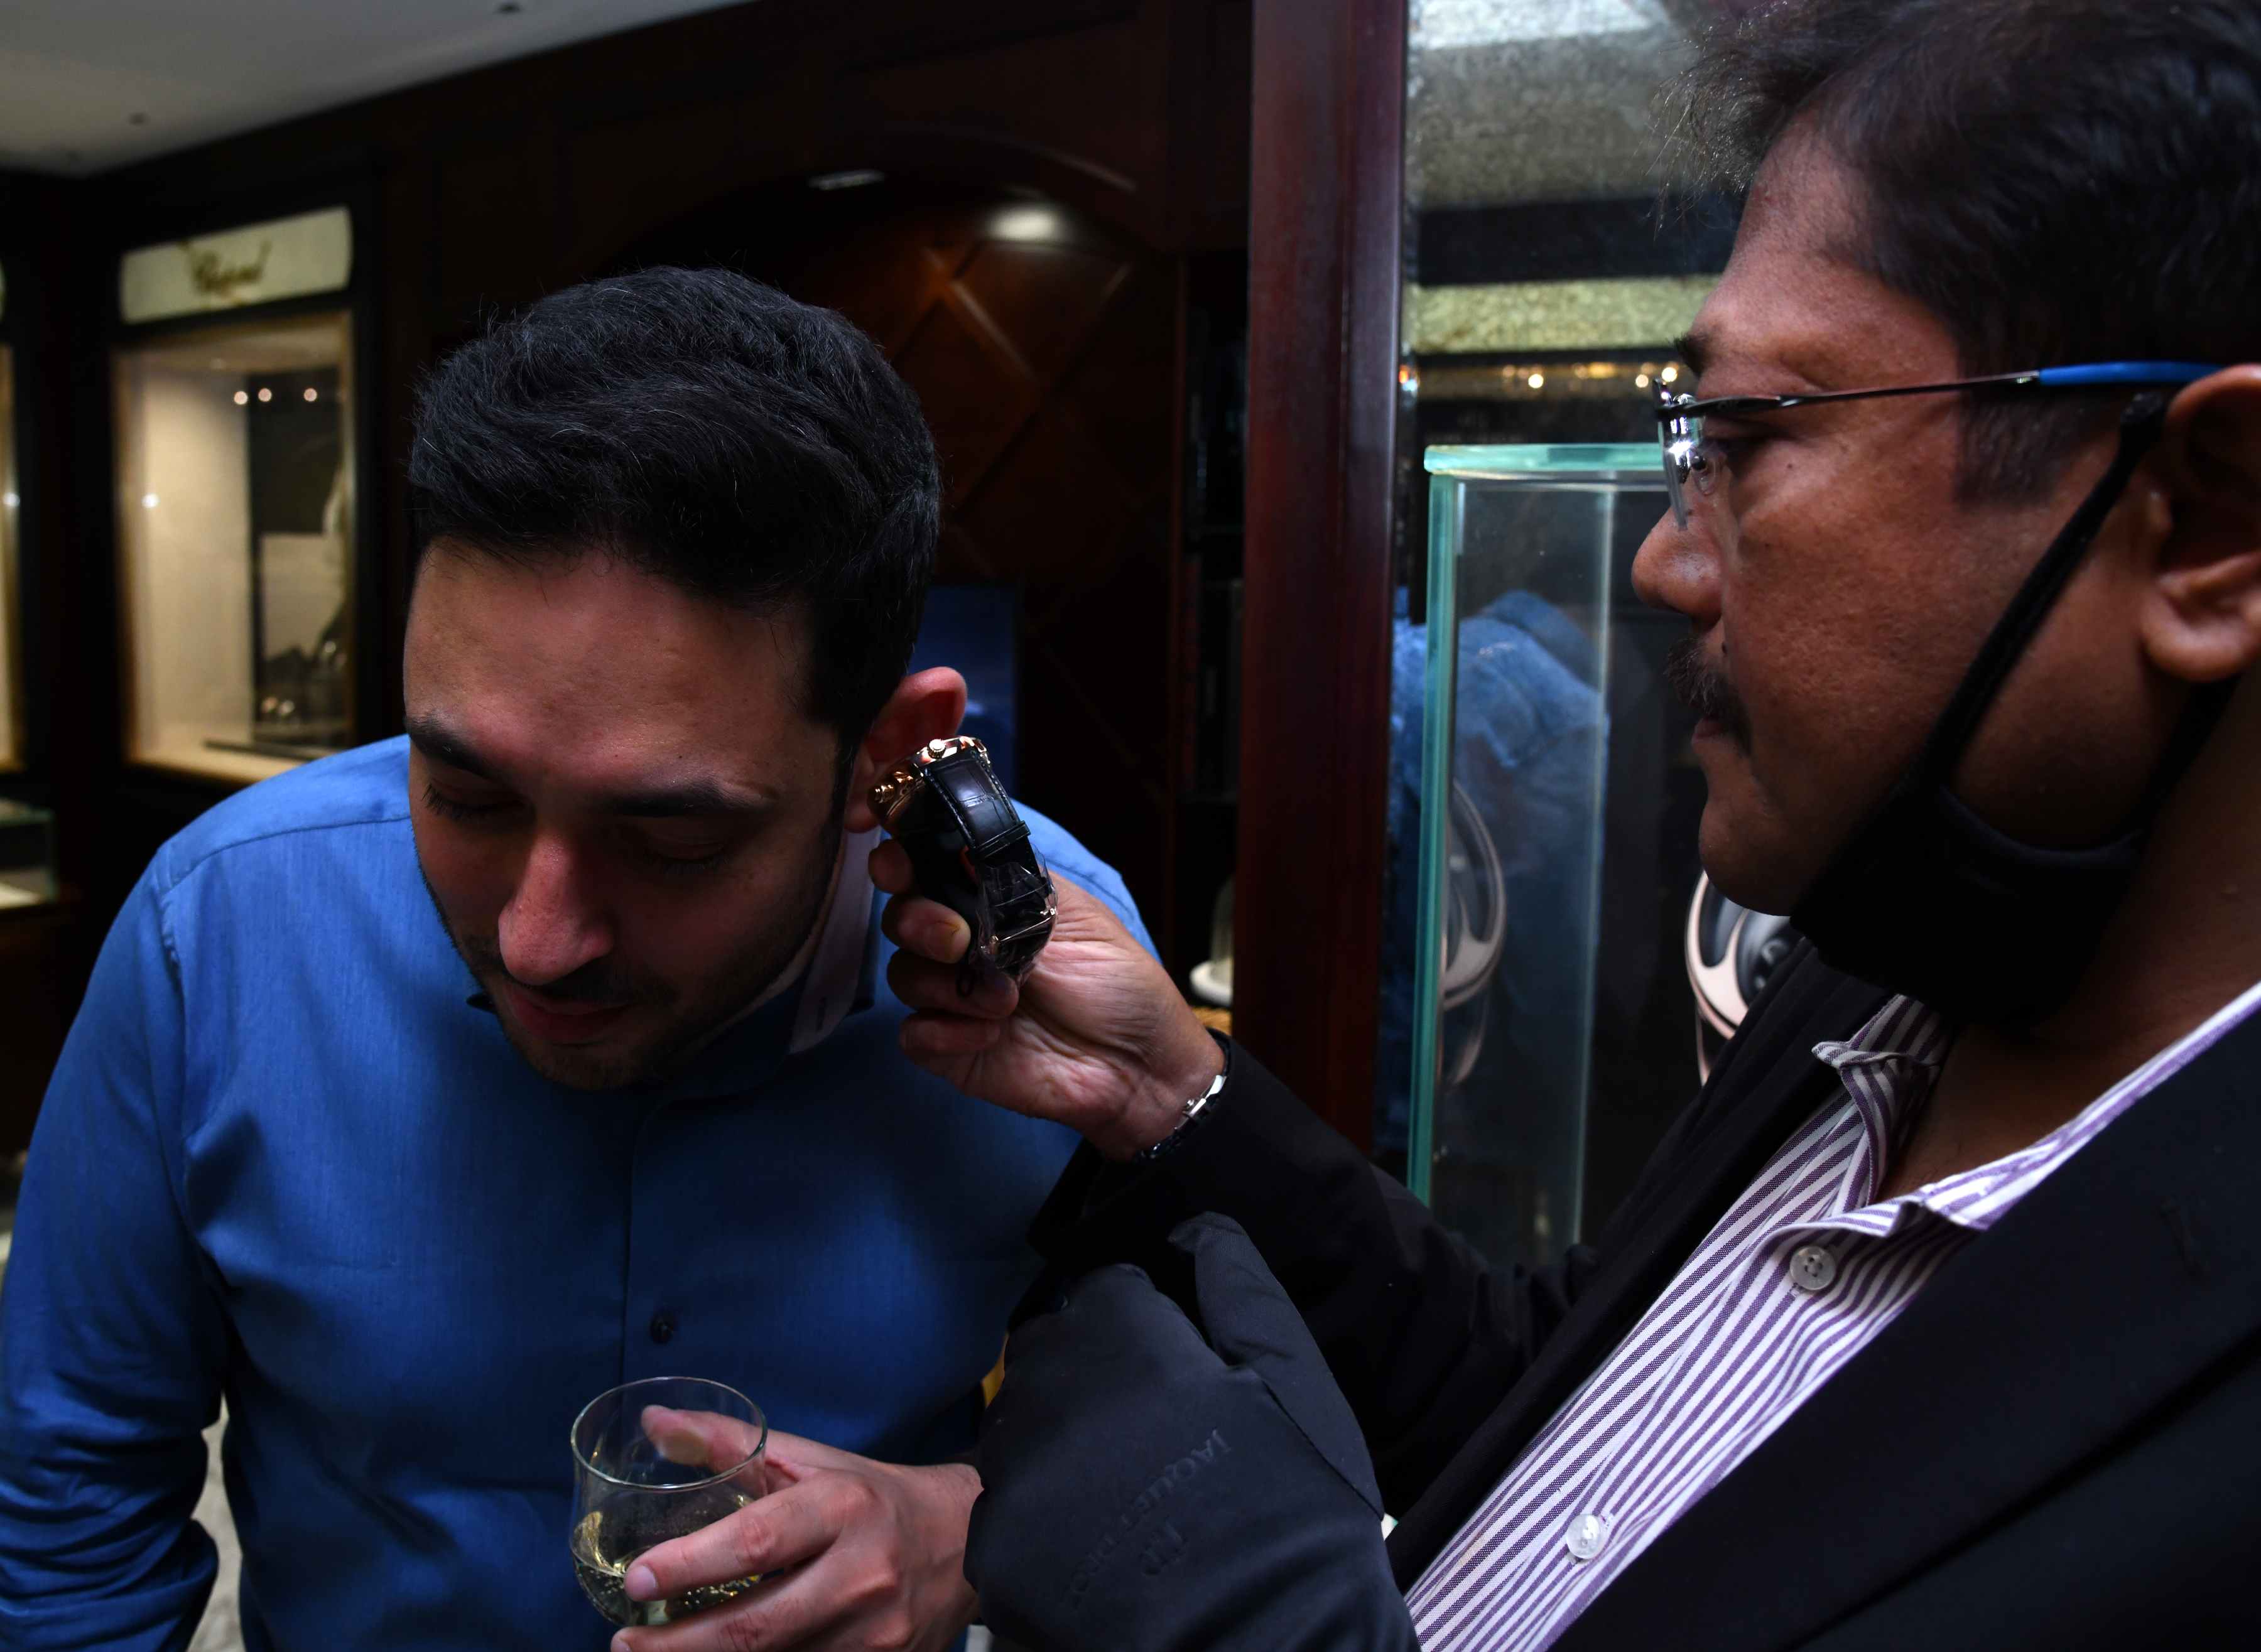 Watch collector Gaurav Tandon hears the chiming of the watch